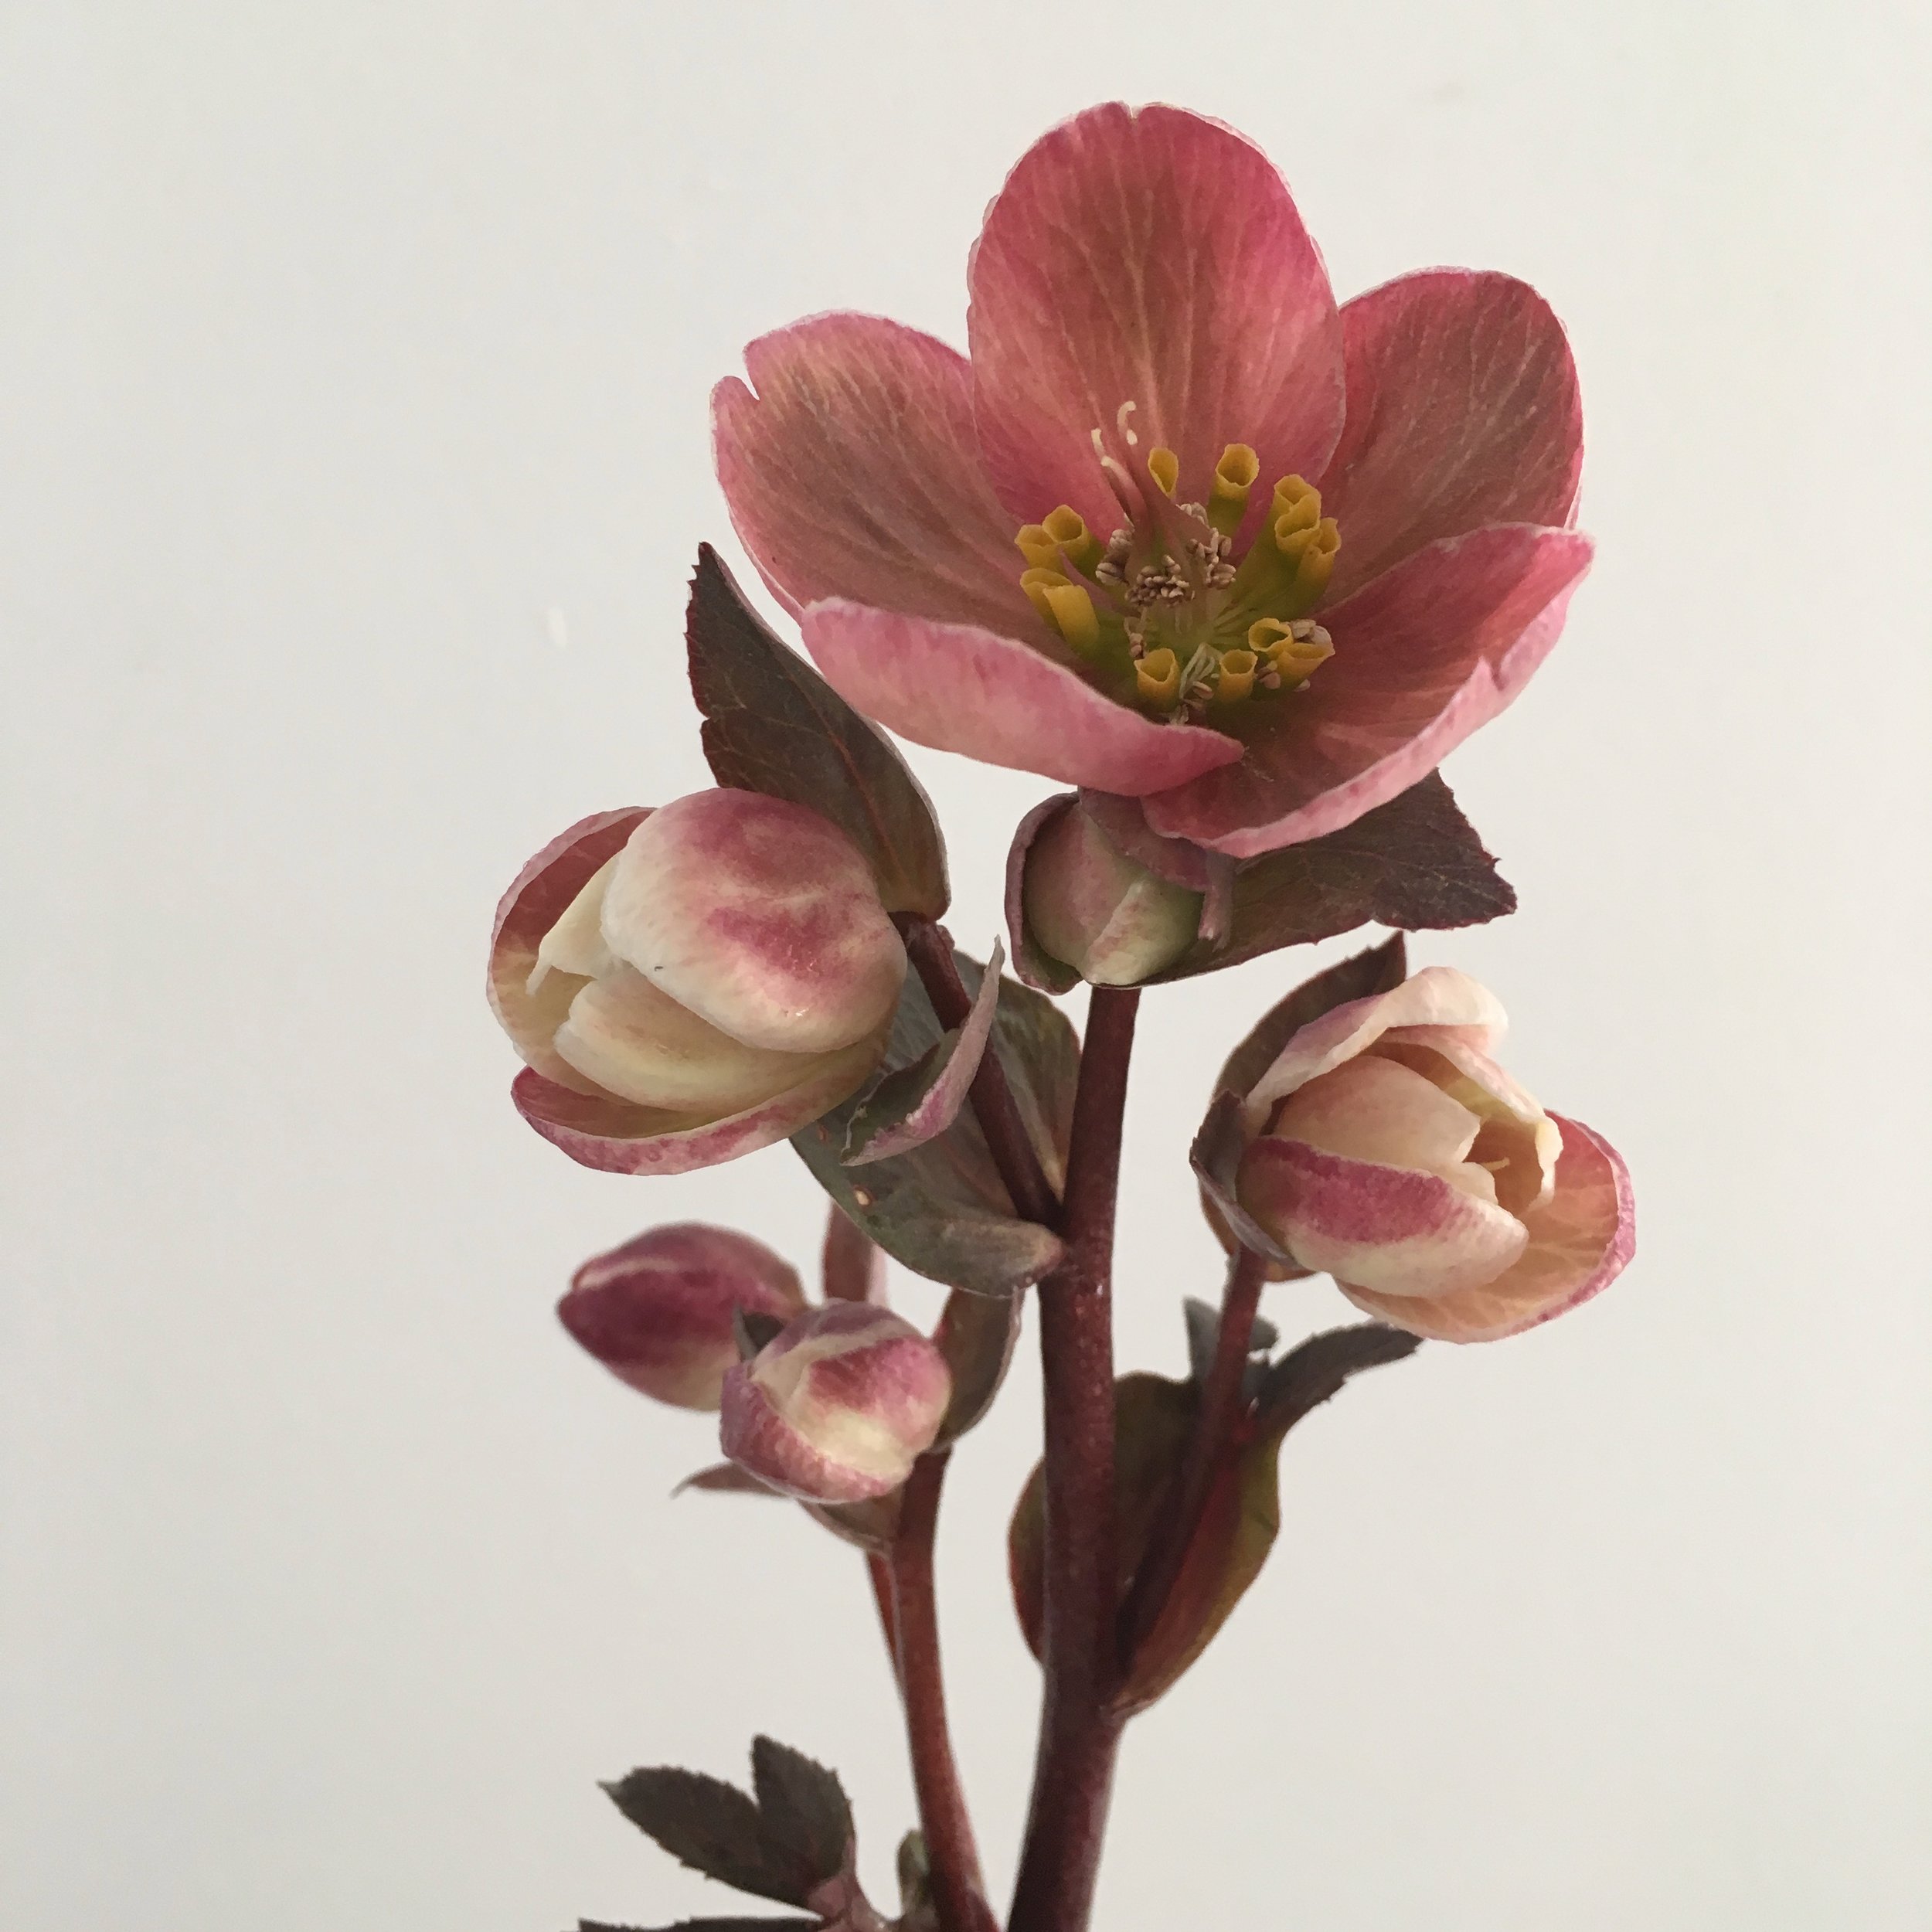 Video: How to Grow, Hydrate, and Hold Hellebores as Cut Flowers